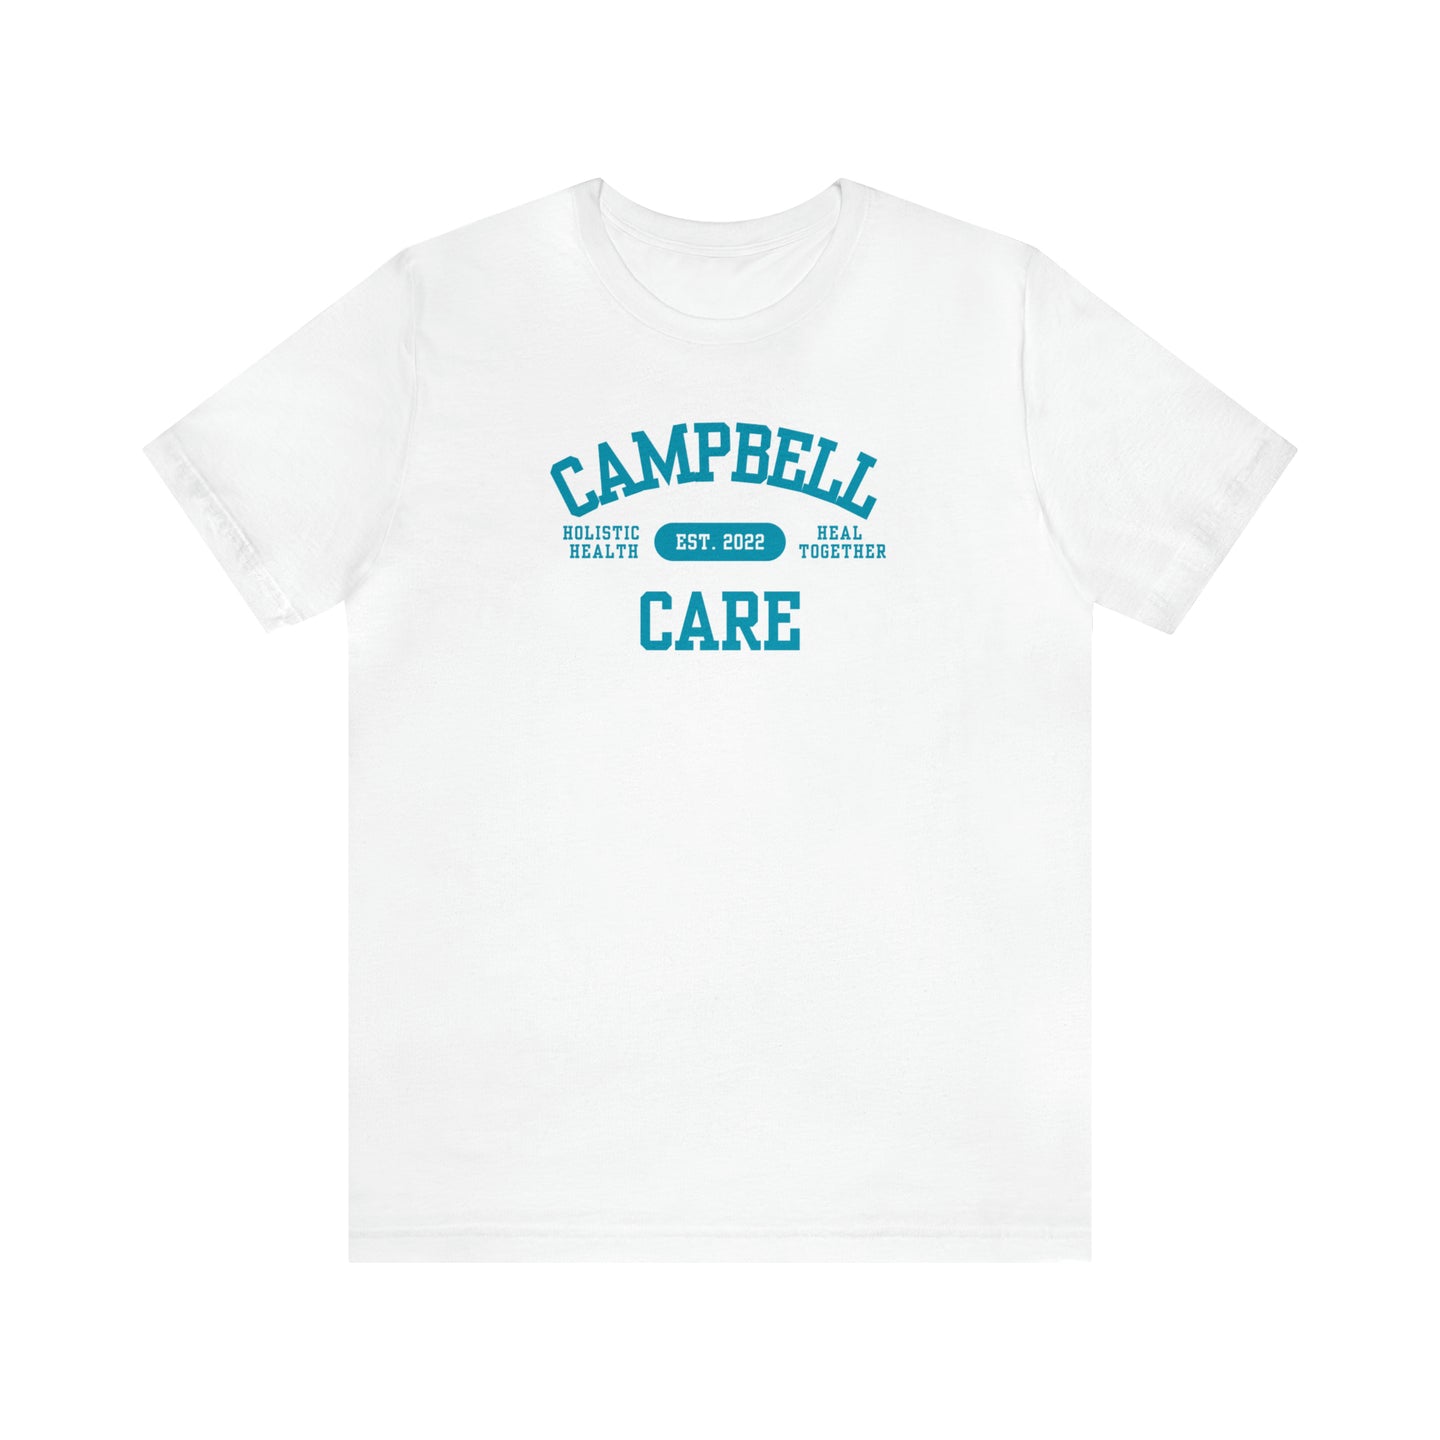 Campbell Care Tee